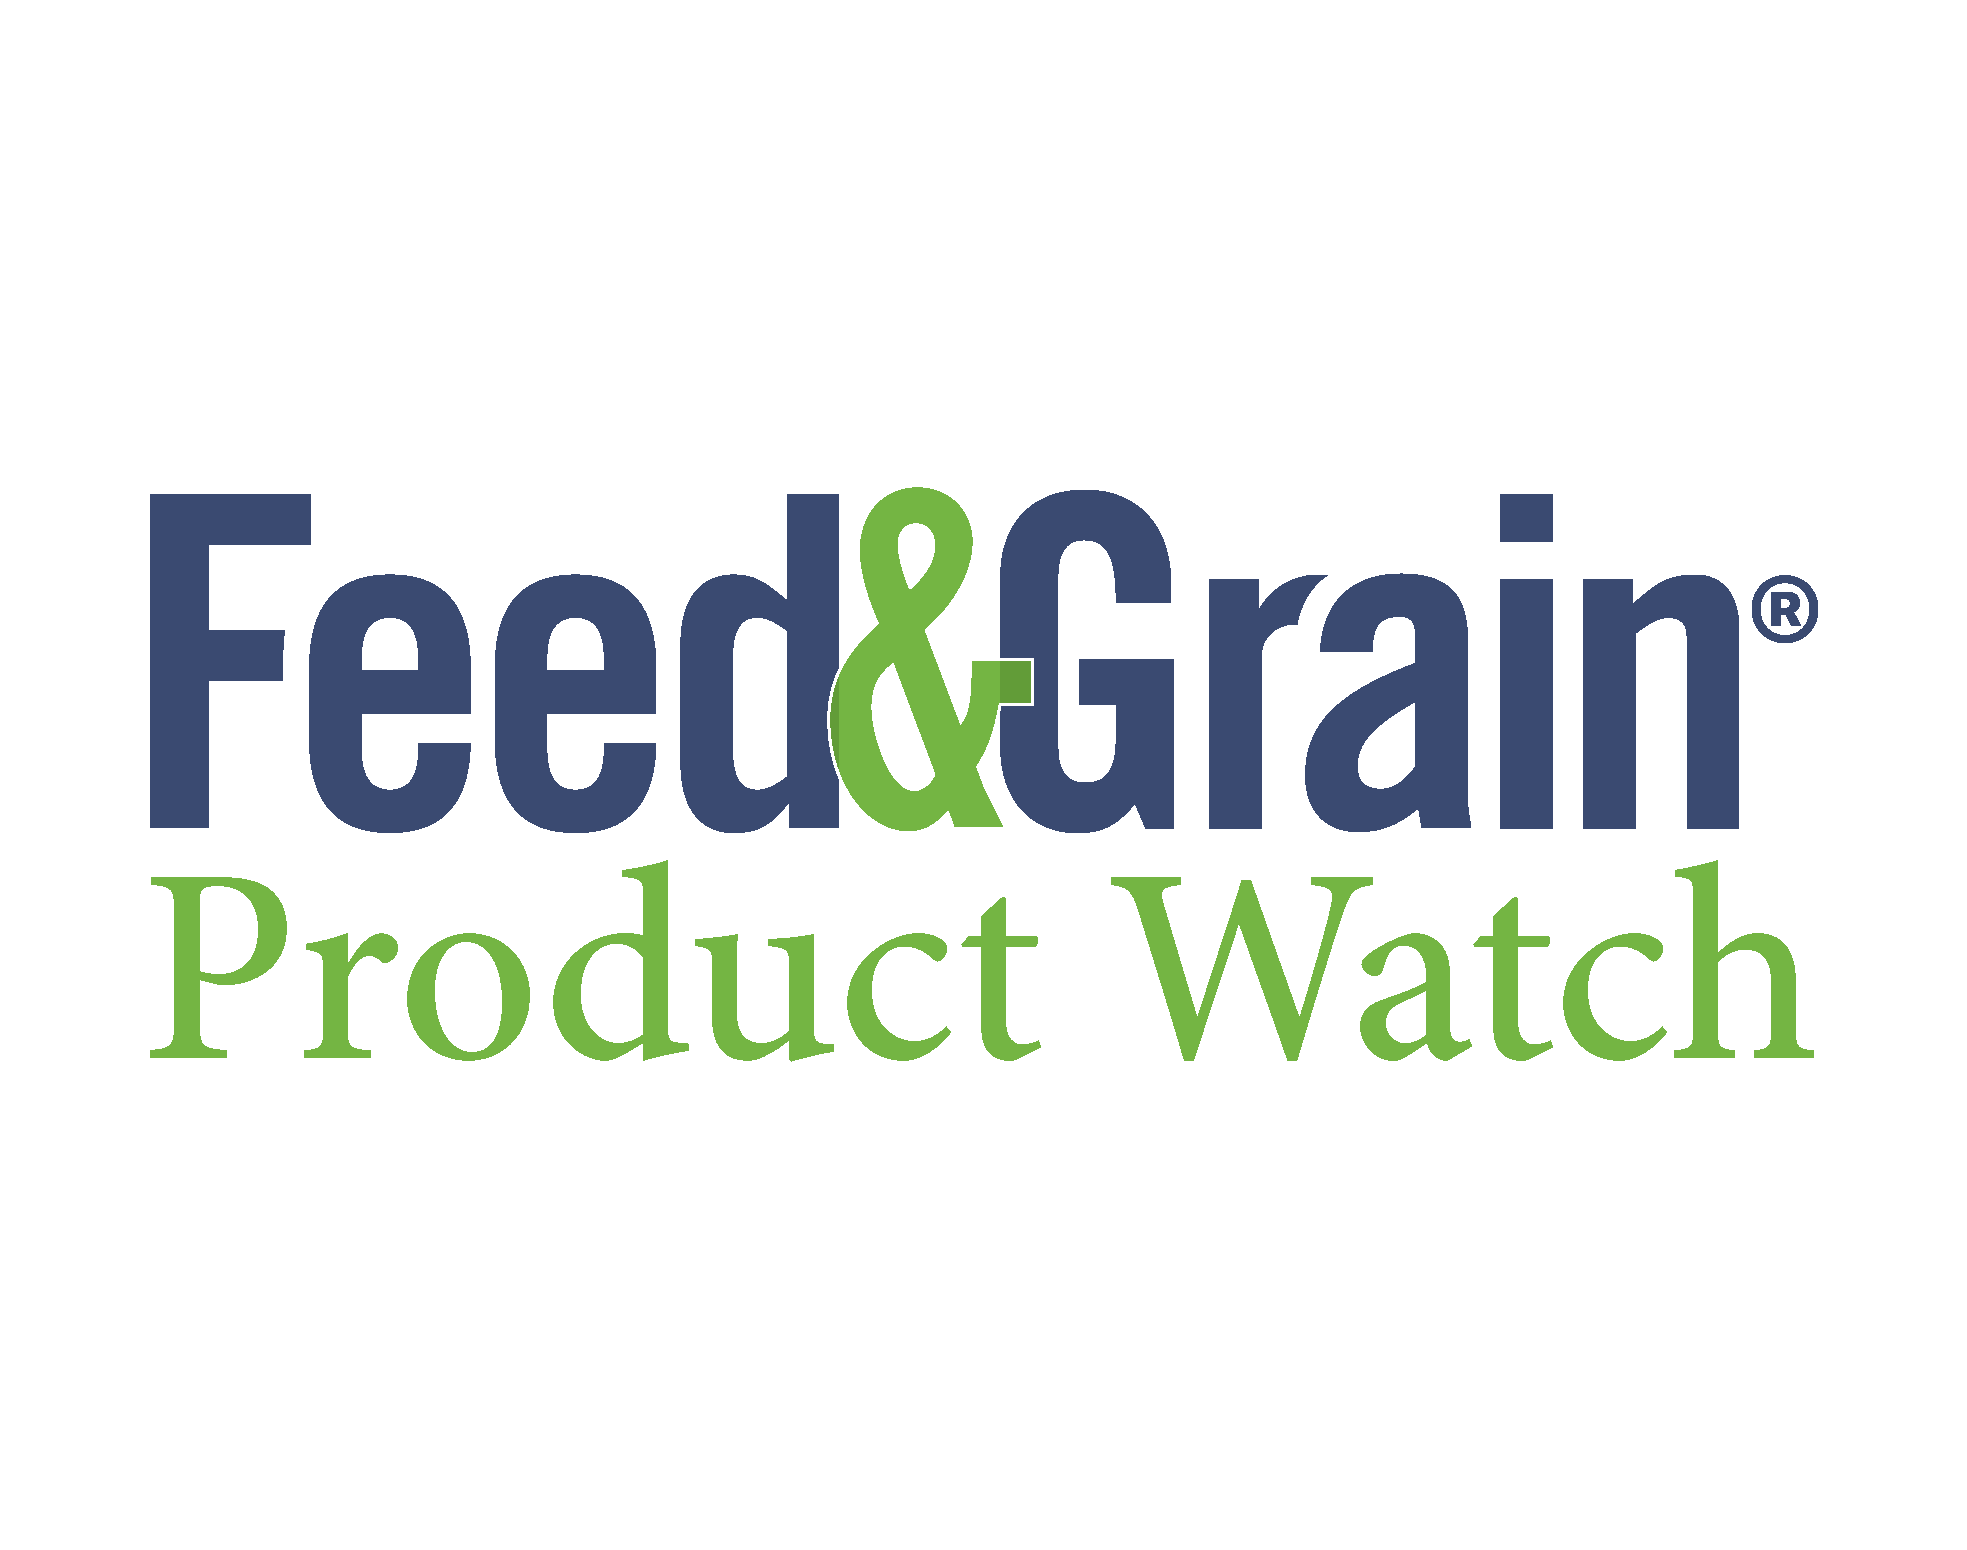 Feed & Grain Product Watch